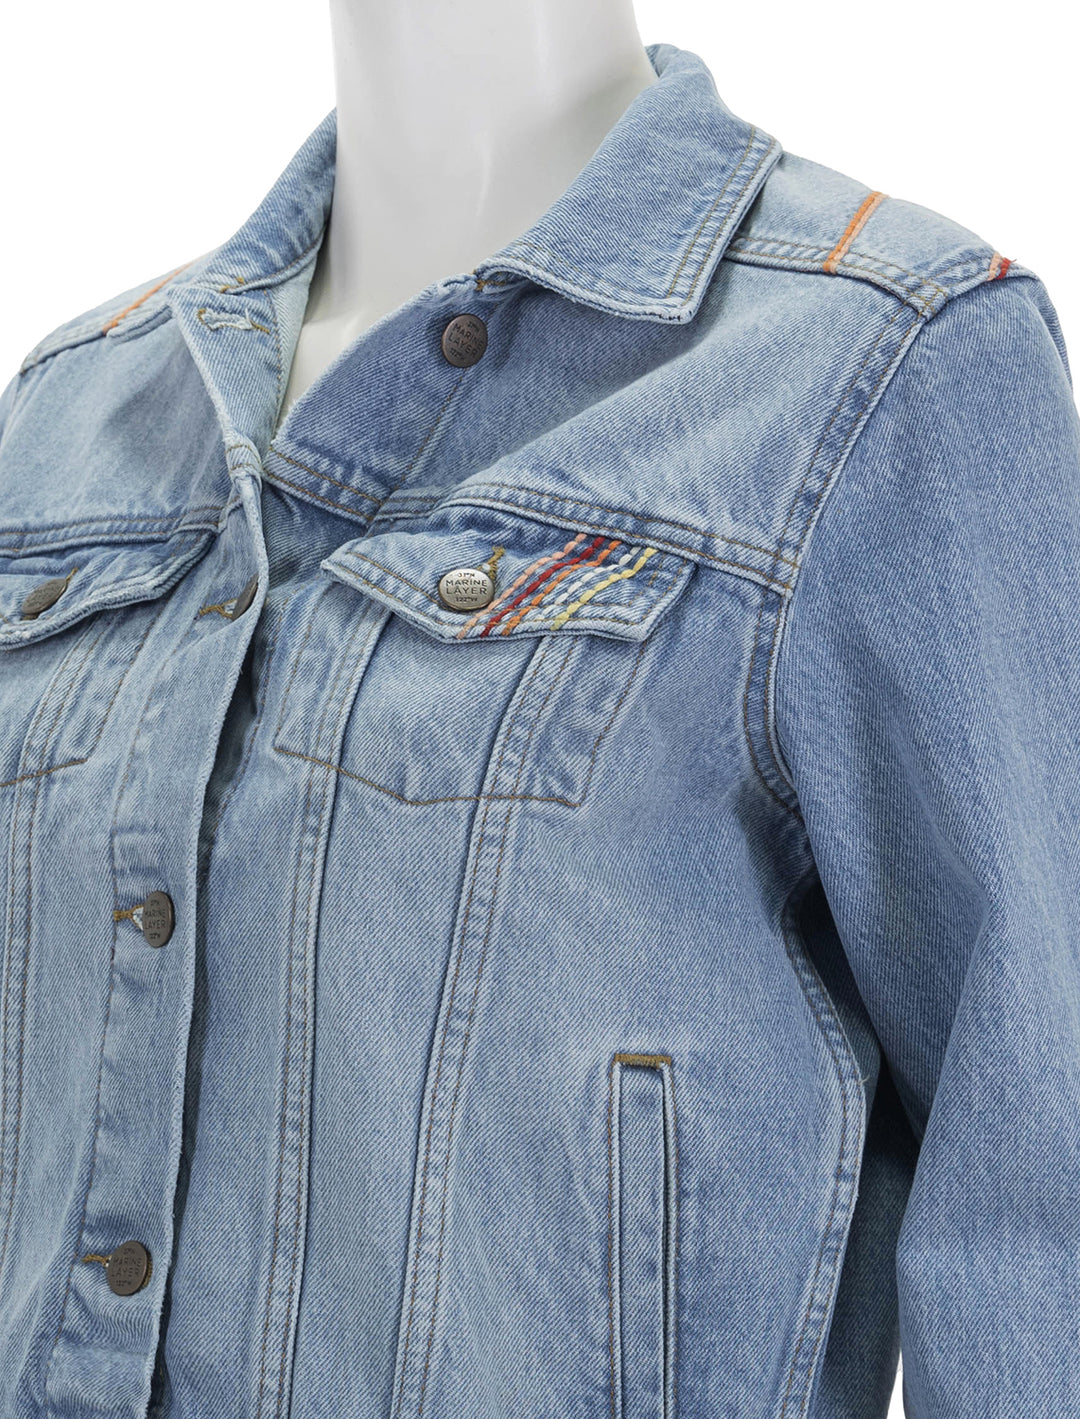 Close-up view of Marine Layer's embroidered denim jacket in light denim.